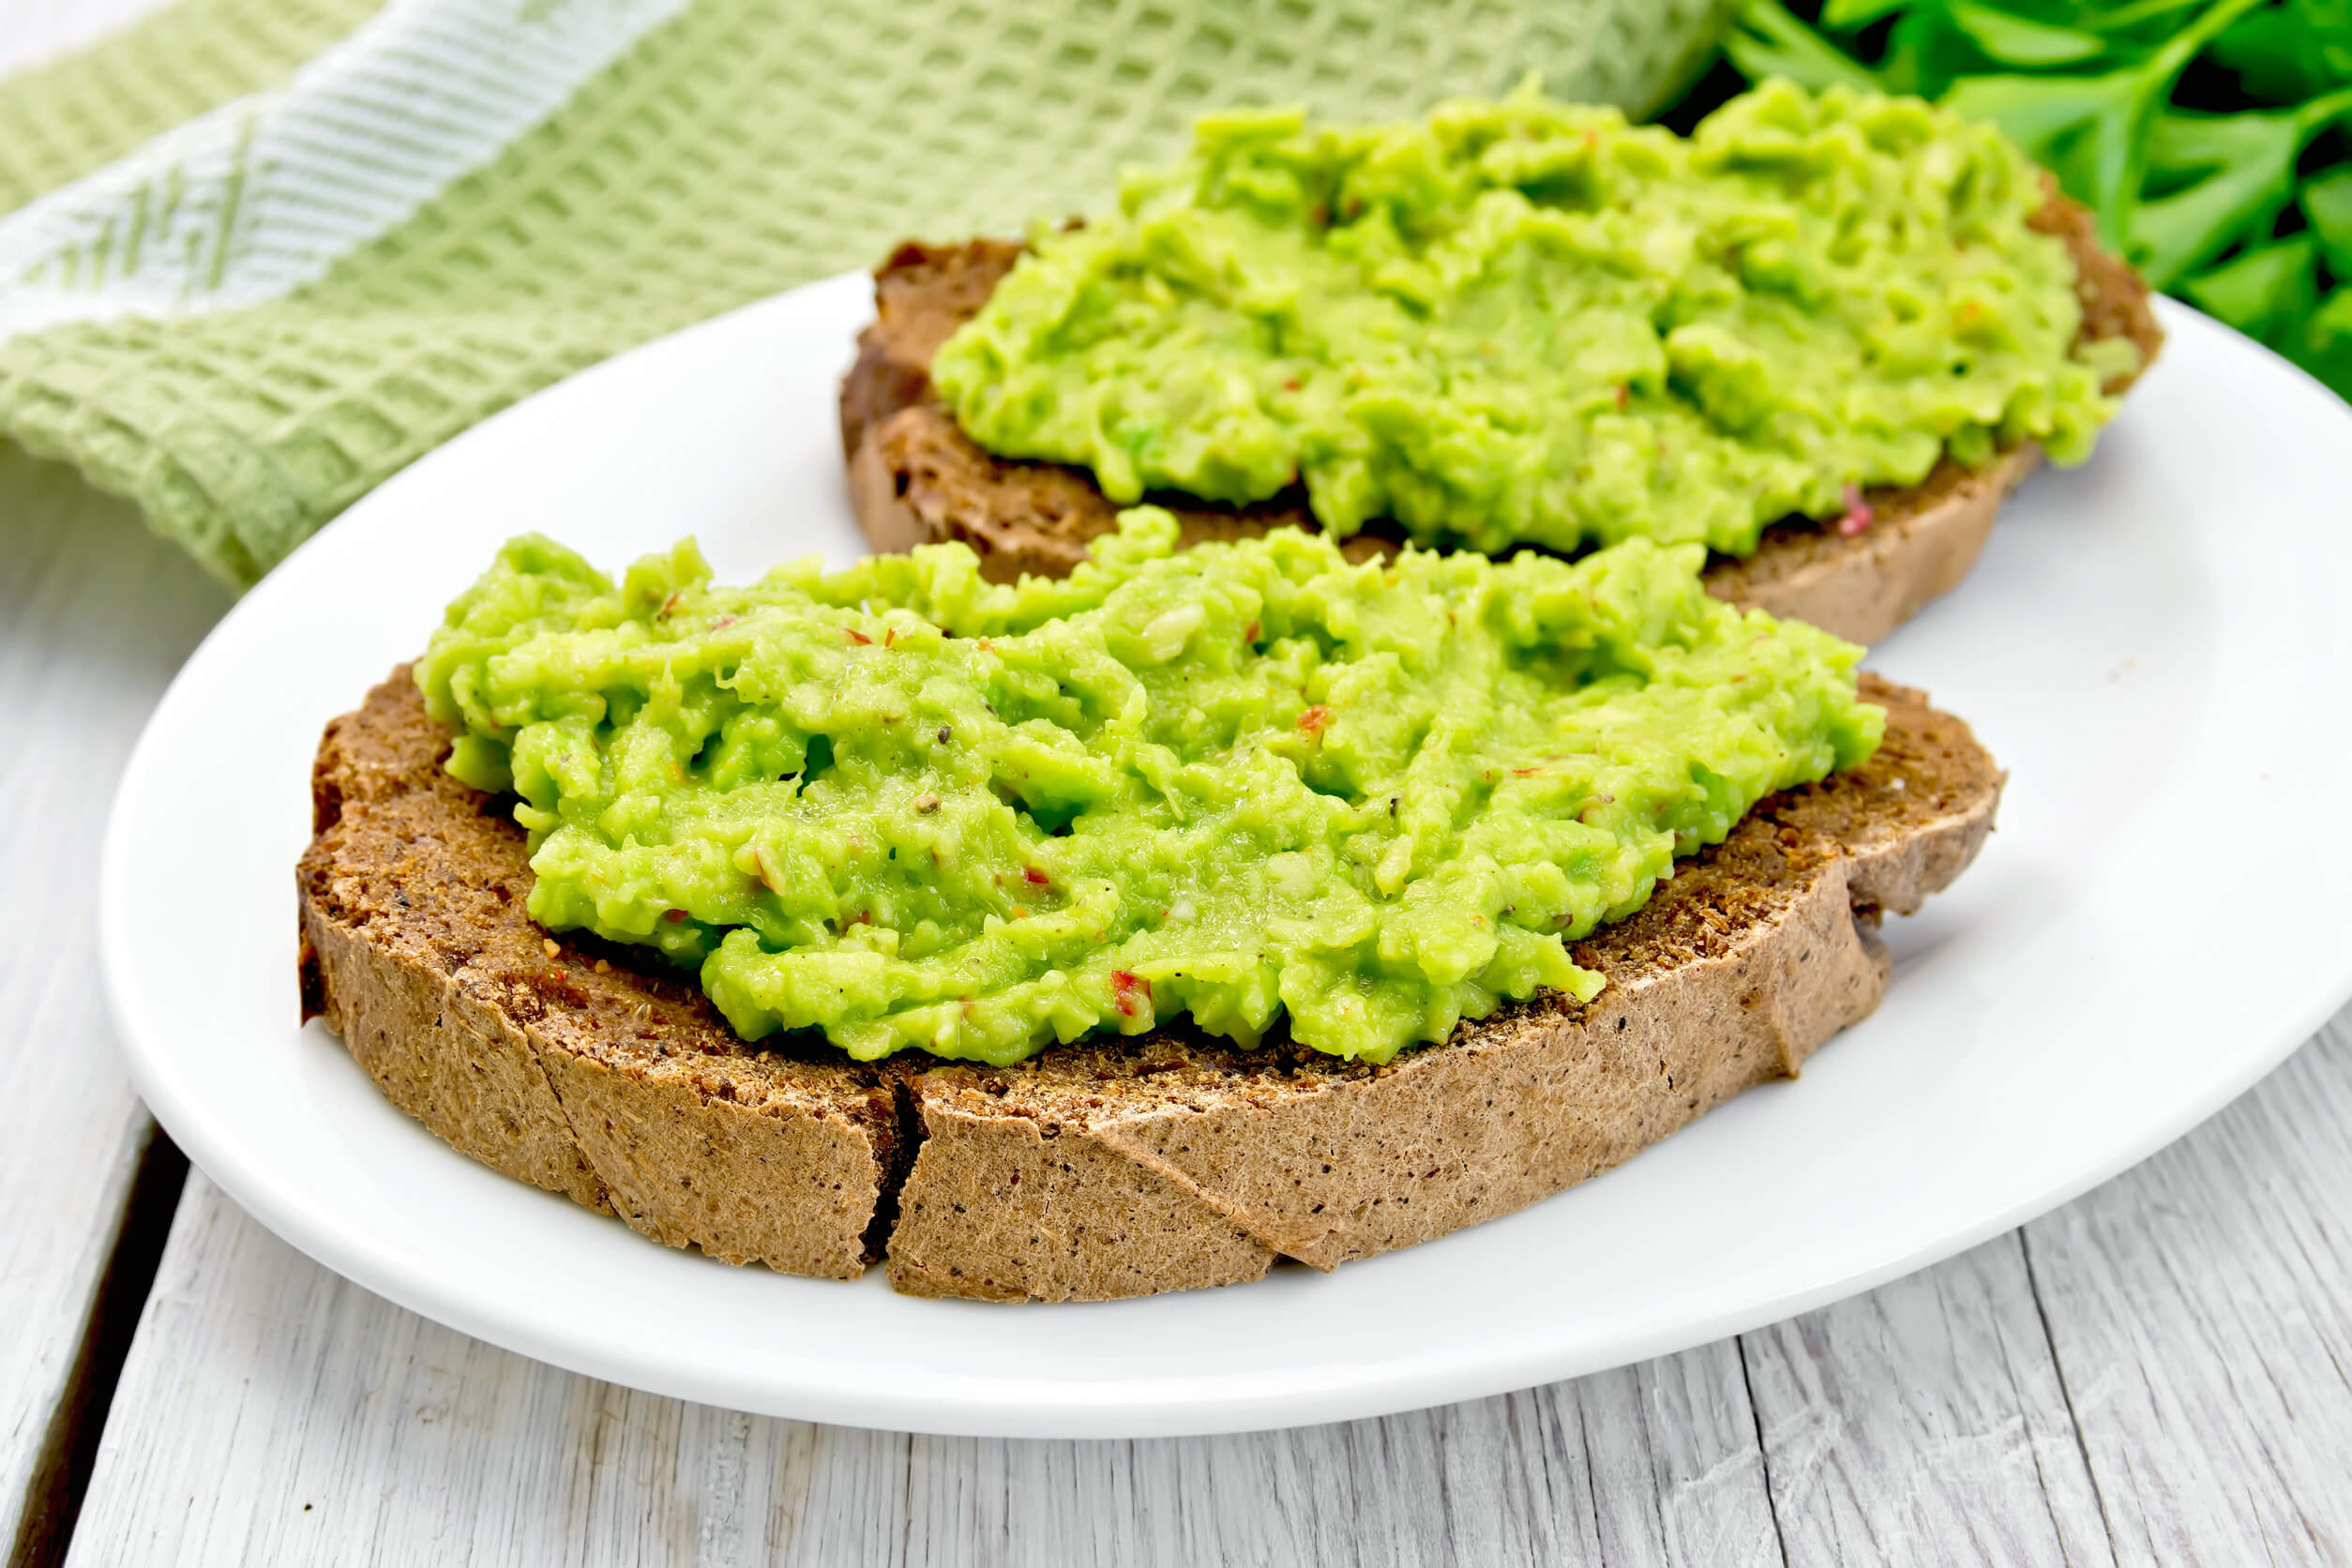 Some healthy dinners for weight loss include tostadas with guacamole.